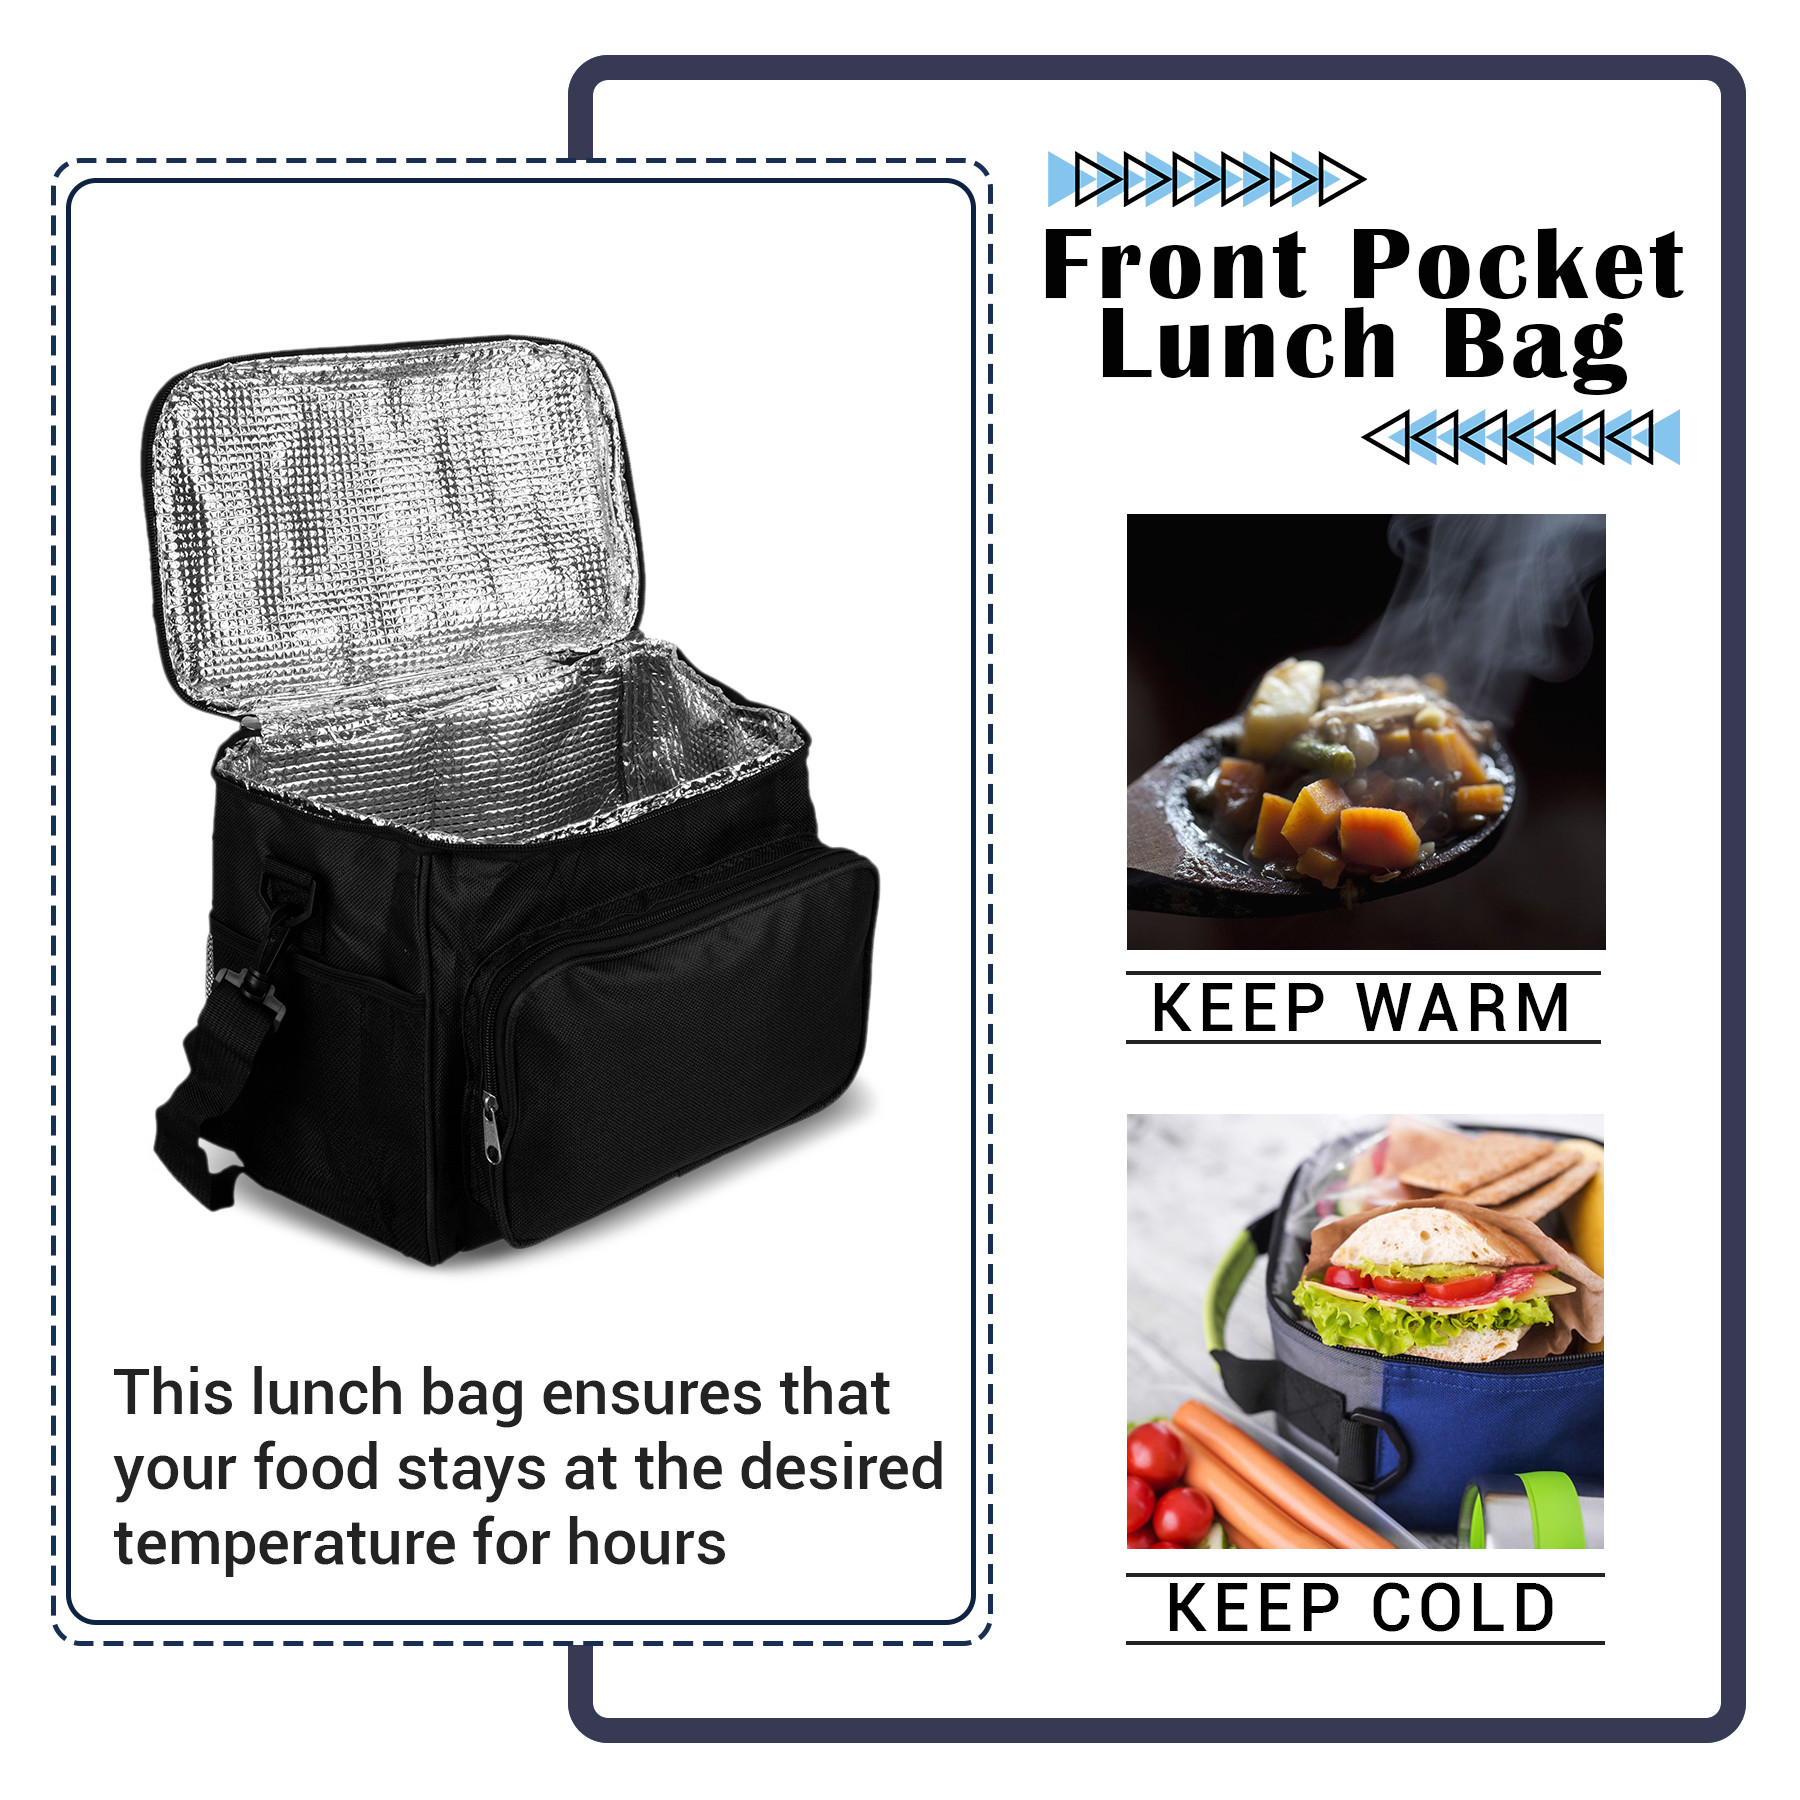 Kuber Industries Lunch Bag | Rexine Thermal Insulated Lunch Bag | Tiffin Bag with Bottle Holder | Waterproof Top Handle Lunch Bag | Front Pocket Lunch Bag for Office | Black